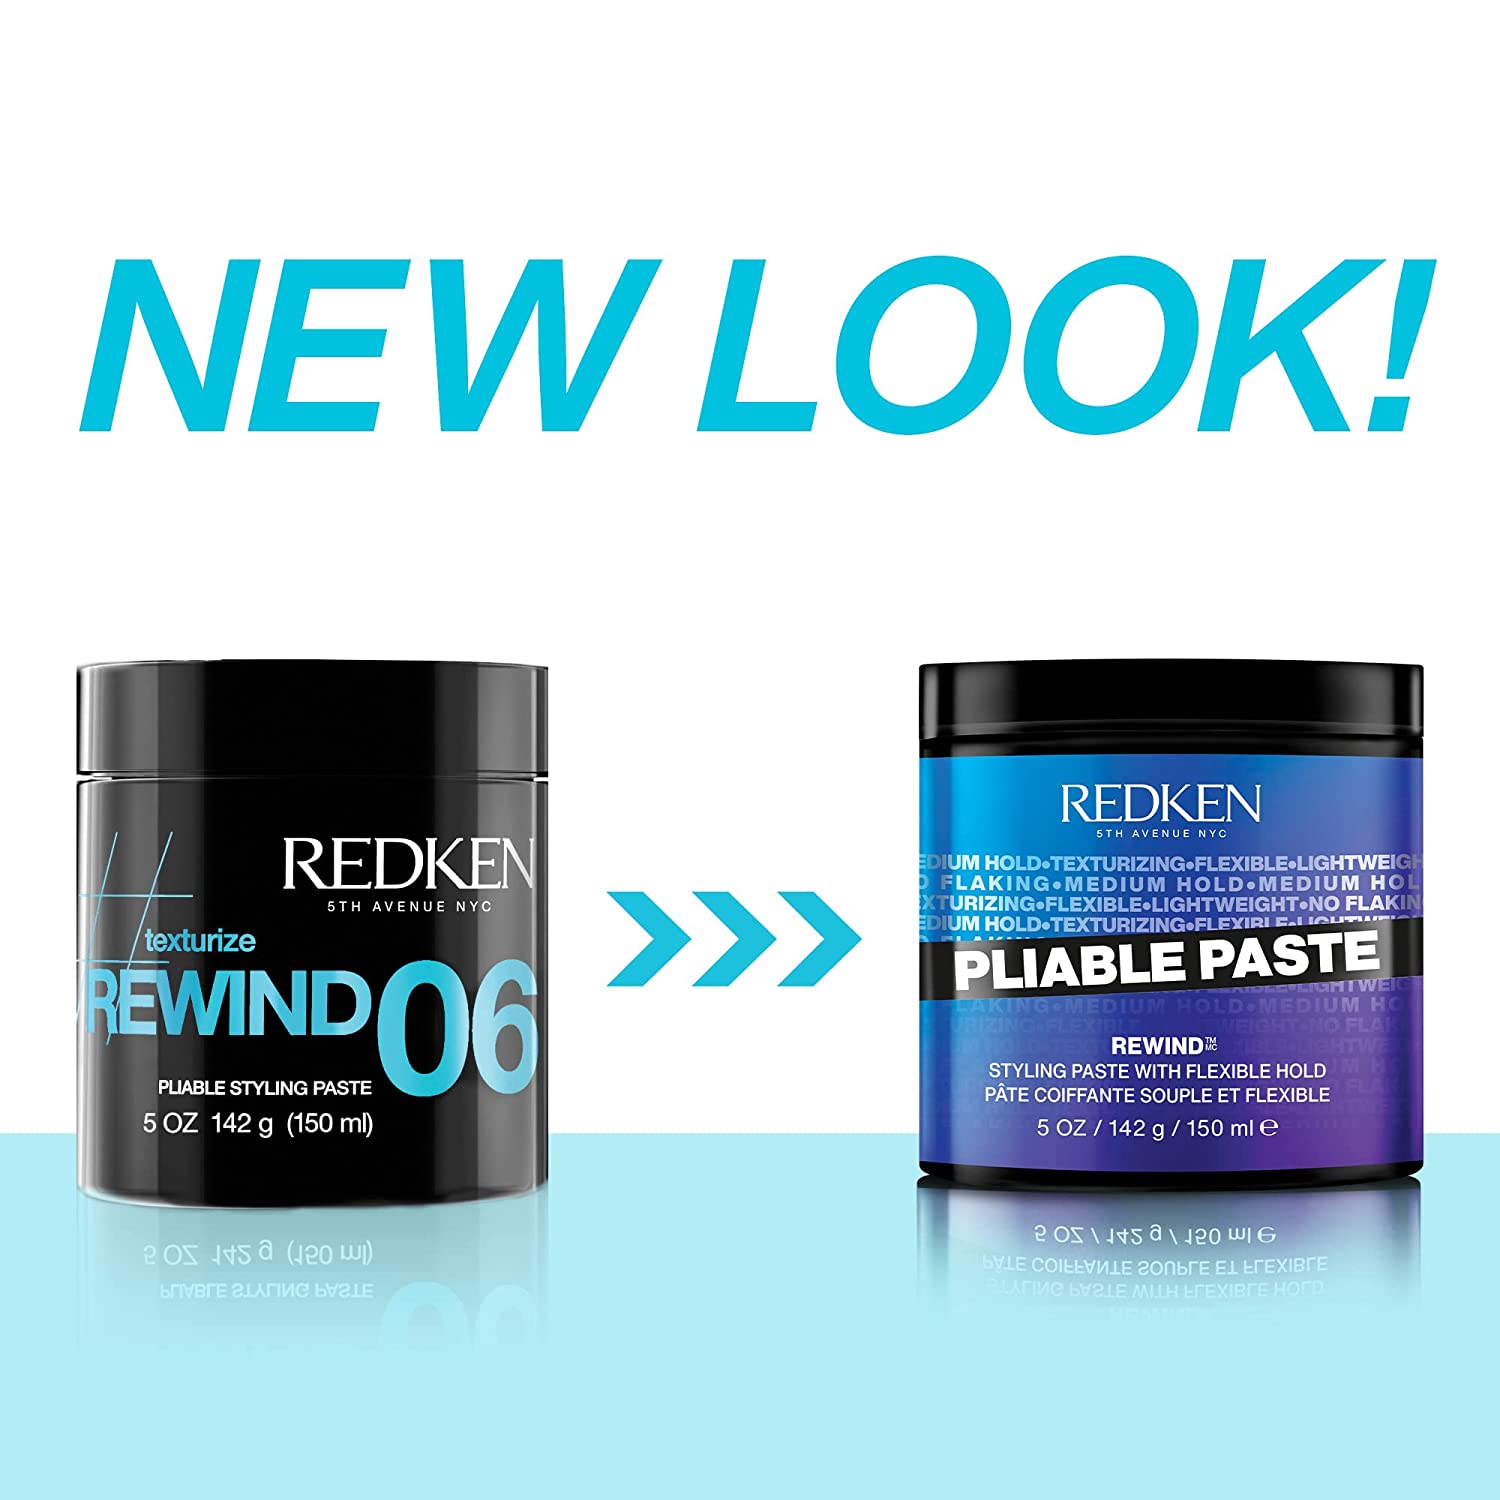 Redken Pliable Paste Flexible Hold Styling Paste | For All Hair Types | Adds Lightweight, Flexible Texture & Moisture | Medium Hold | 5 Oz - image 2 of 2